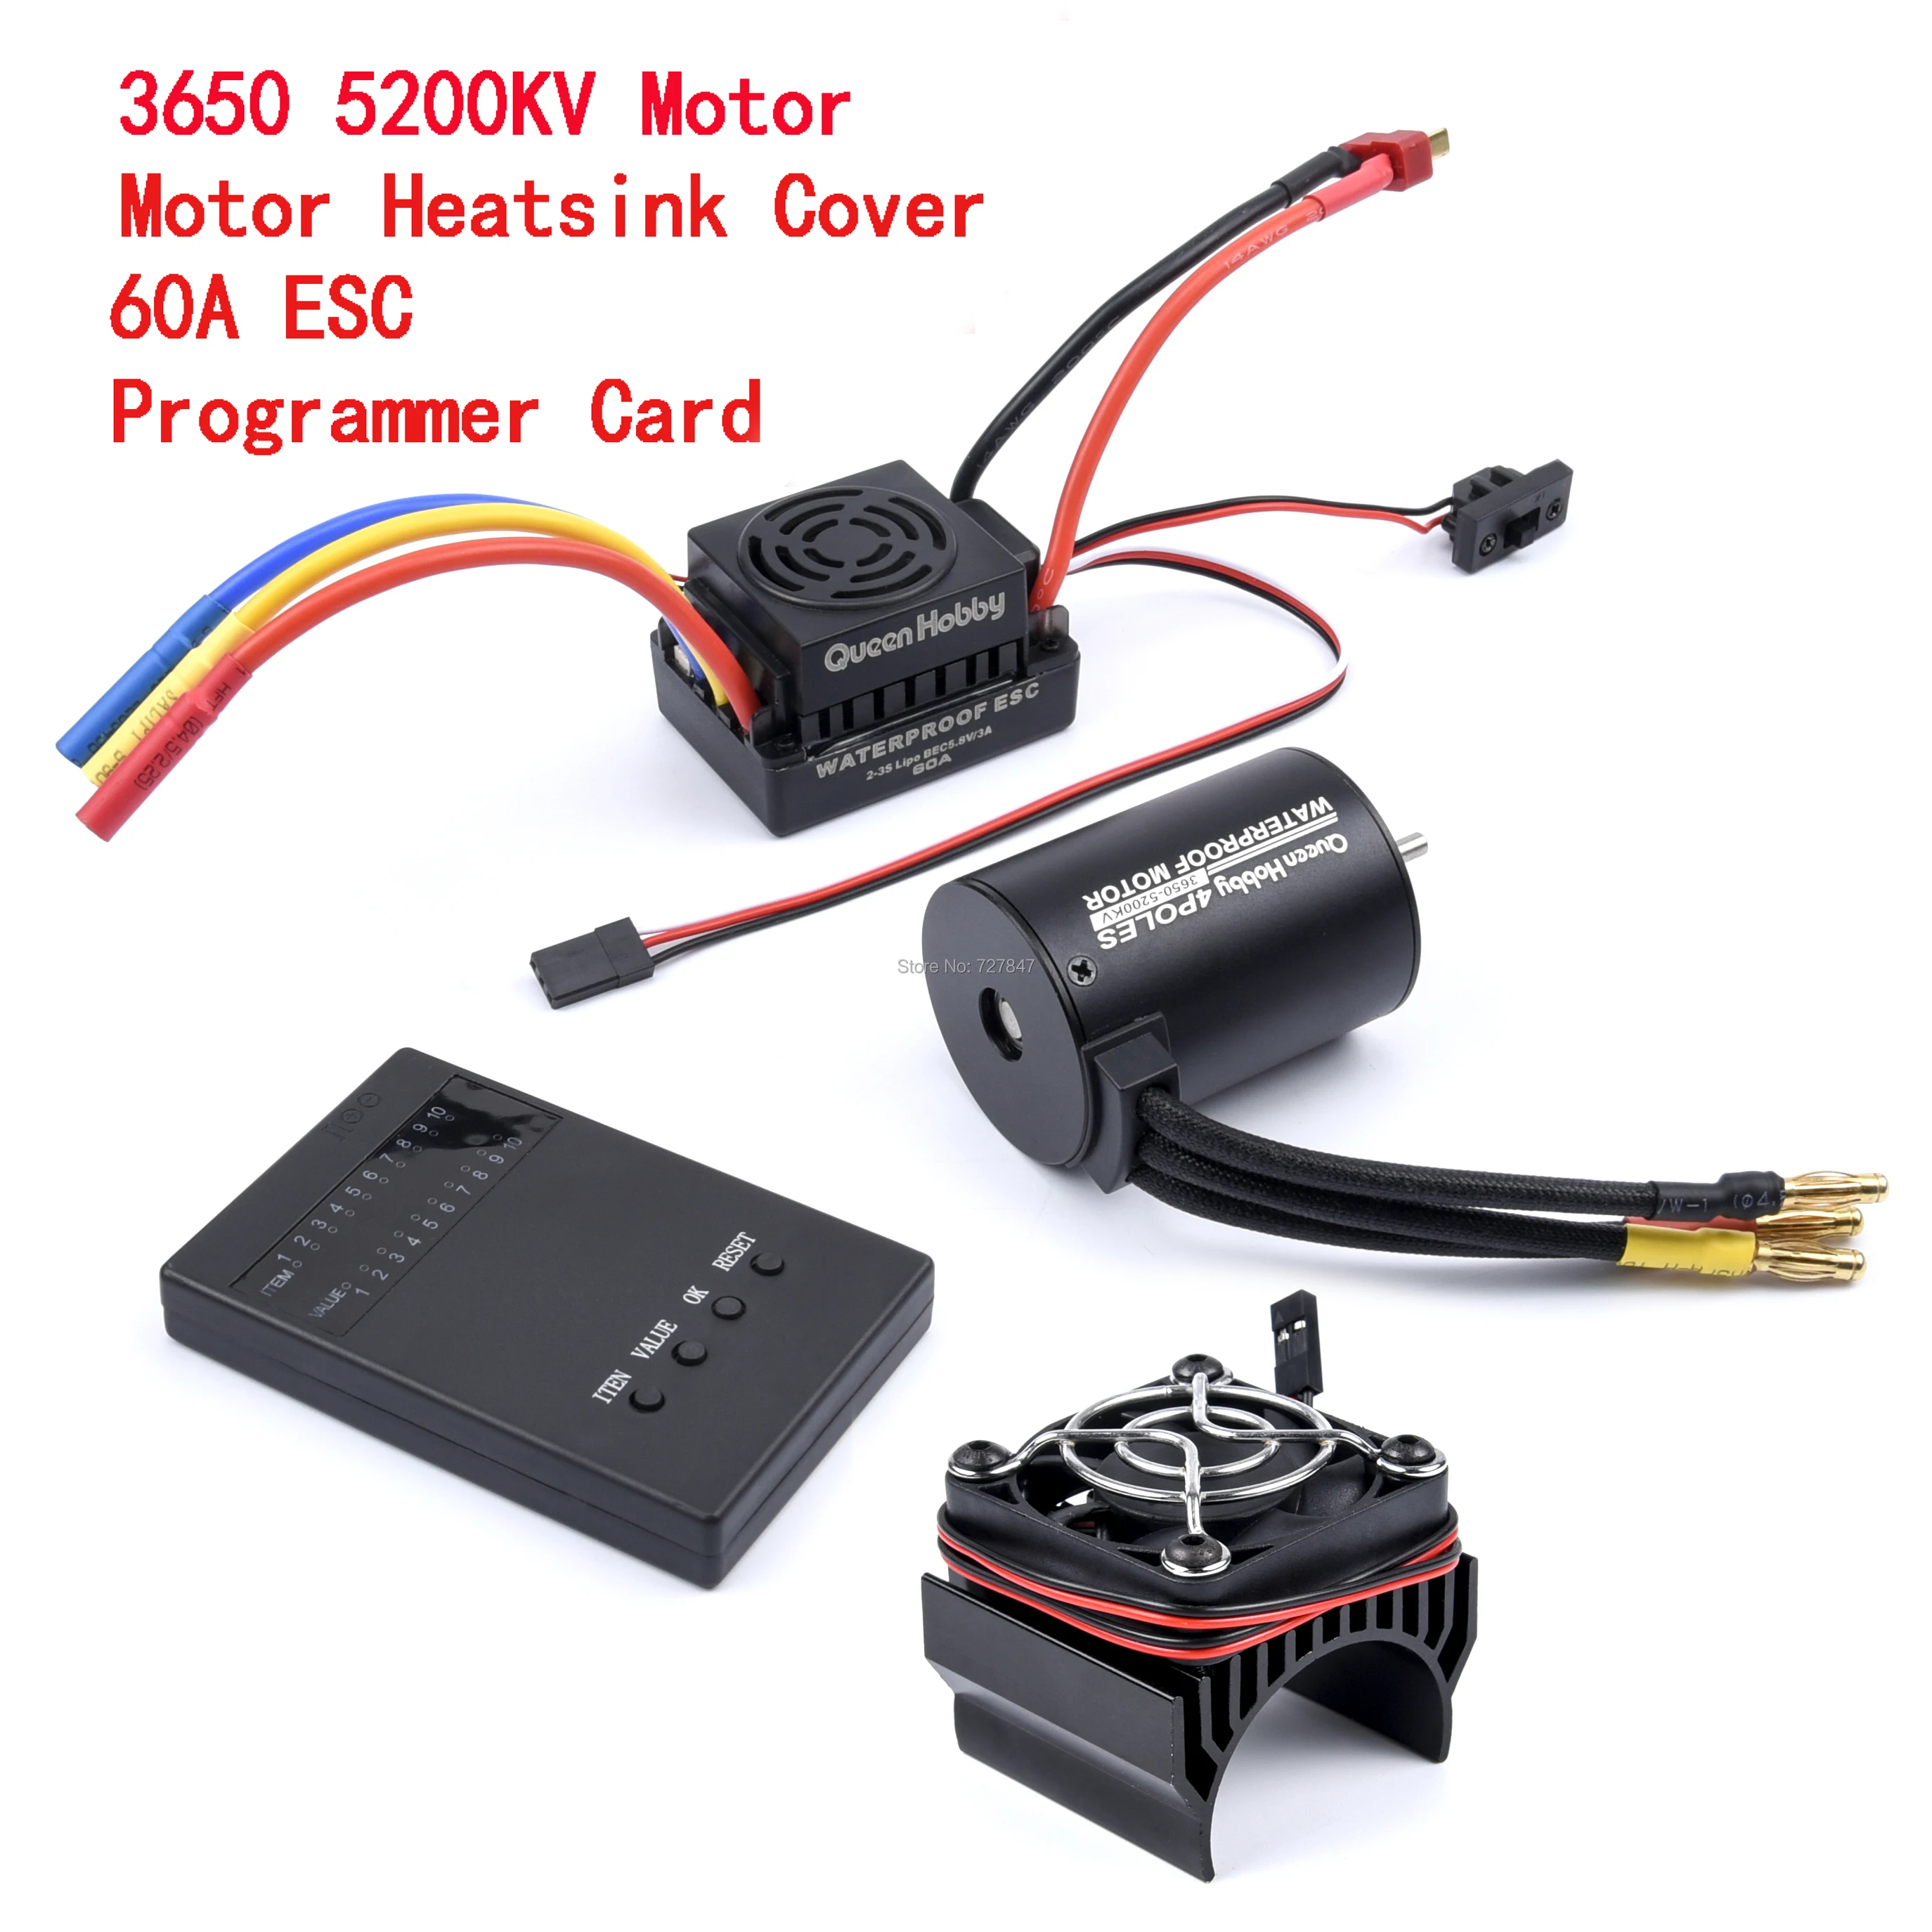 

3650 5200KV 4 Rotor Poles Sensorless Brushless Motor with 60A Electronic Speed Controller Combo Set for 1/10 1:10 RC Car Truck